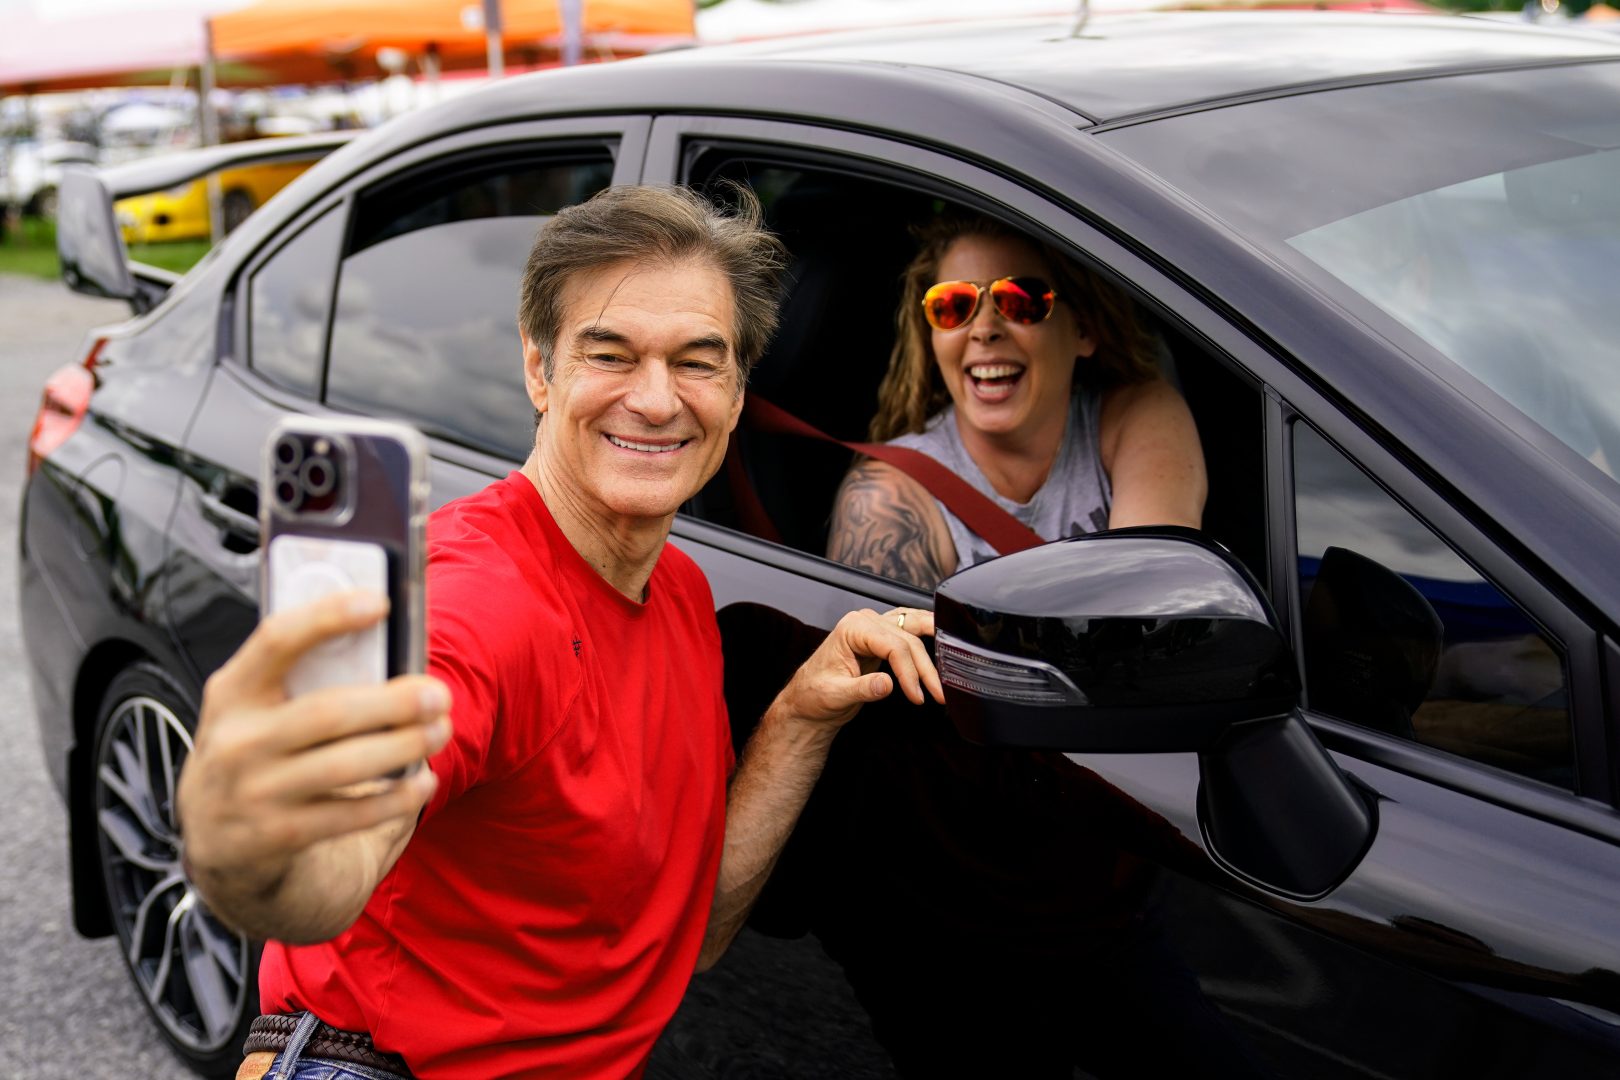 Mehmet Oz, a Republican candidate for U.S. Senate in Pennsylvania, poses for a photograph with an attendee during his visit to a car show in Carlisle, Pa., Saturday, May 14, 2022. (AP Photo/Matt Rourke)